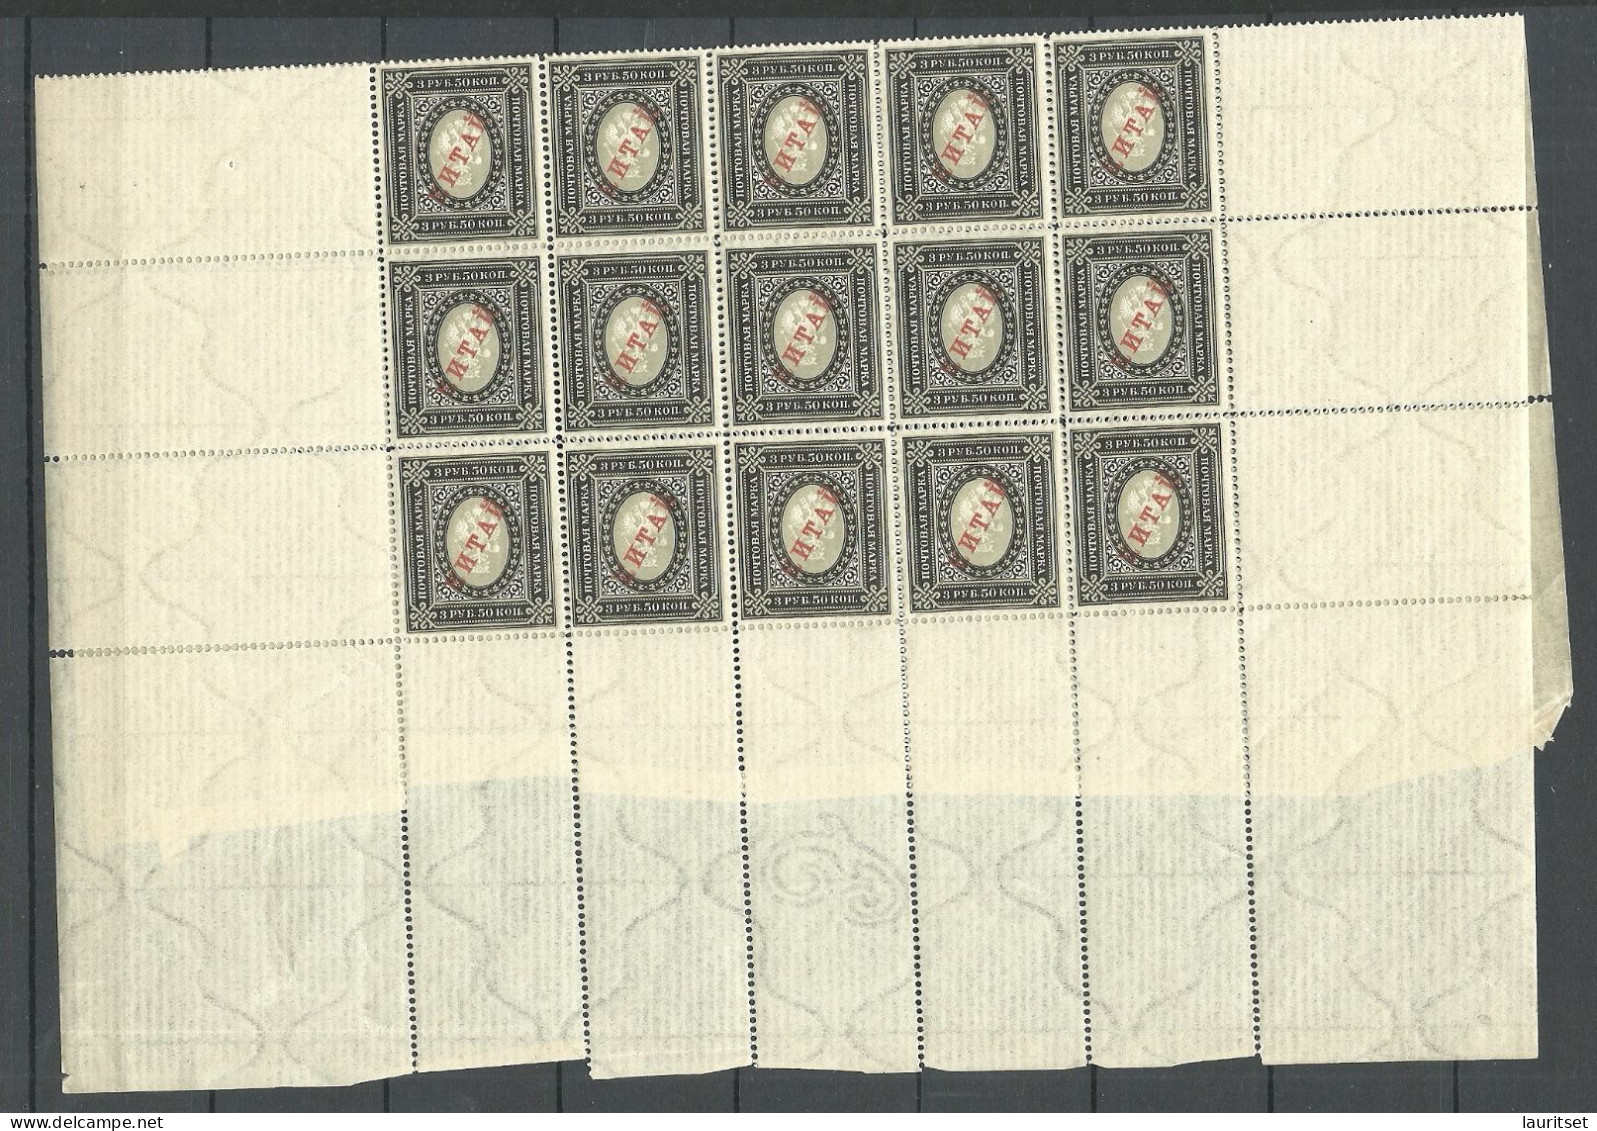 RUSSLAND RUSSIA China 1907 Michel 16 Y Complete Sheet Of 25 MNH - Chine